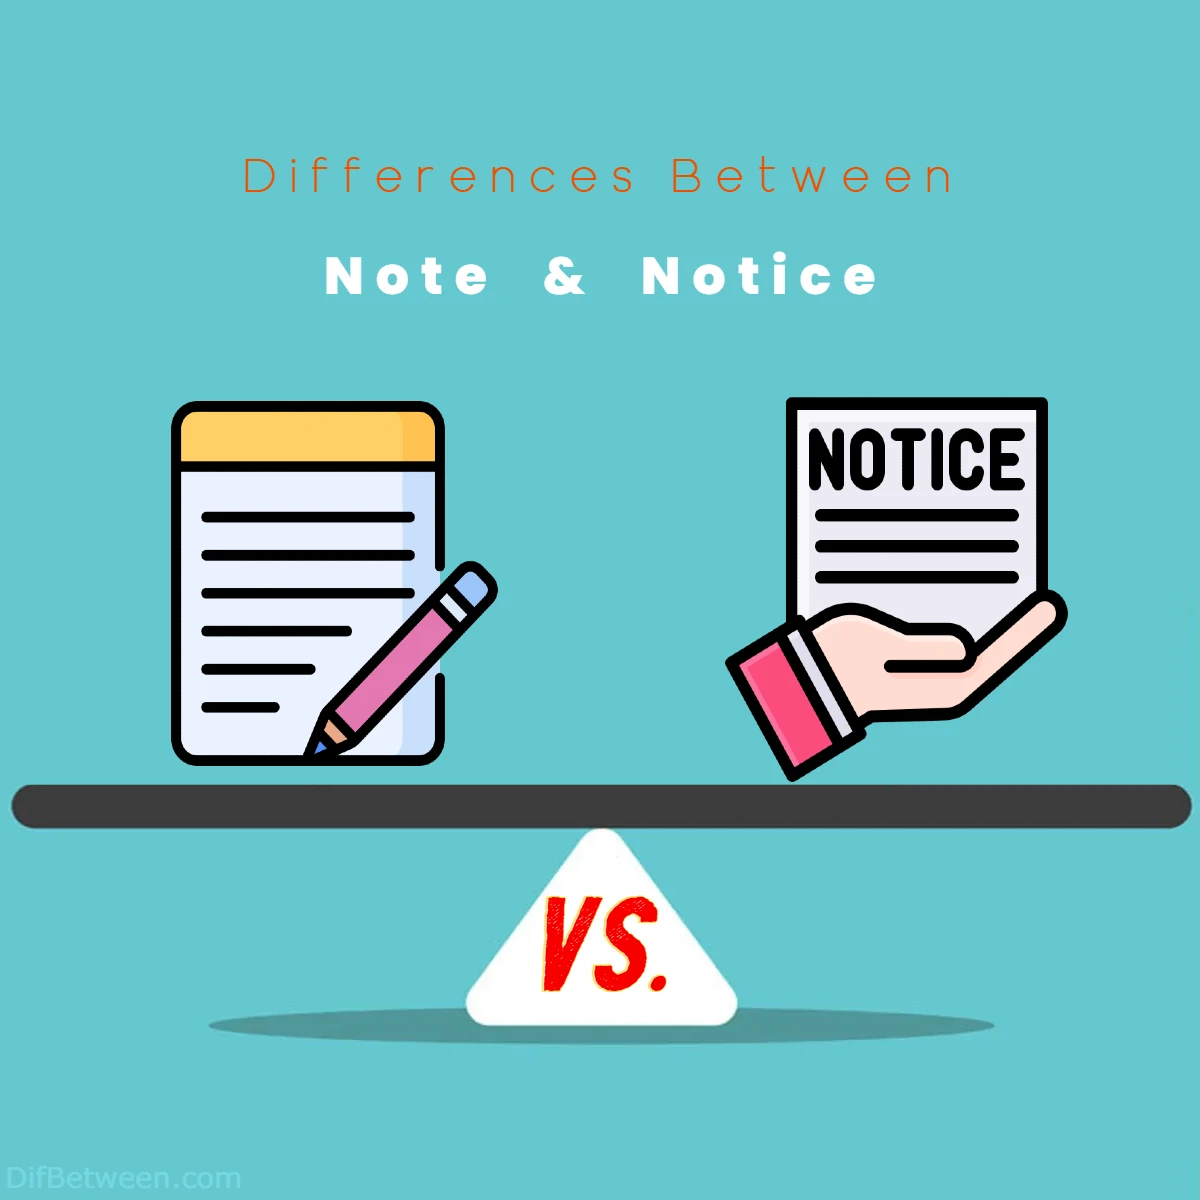 Differences Between Note vs Notice